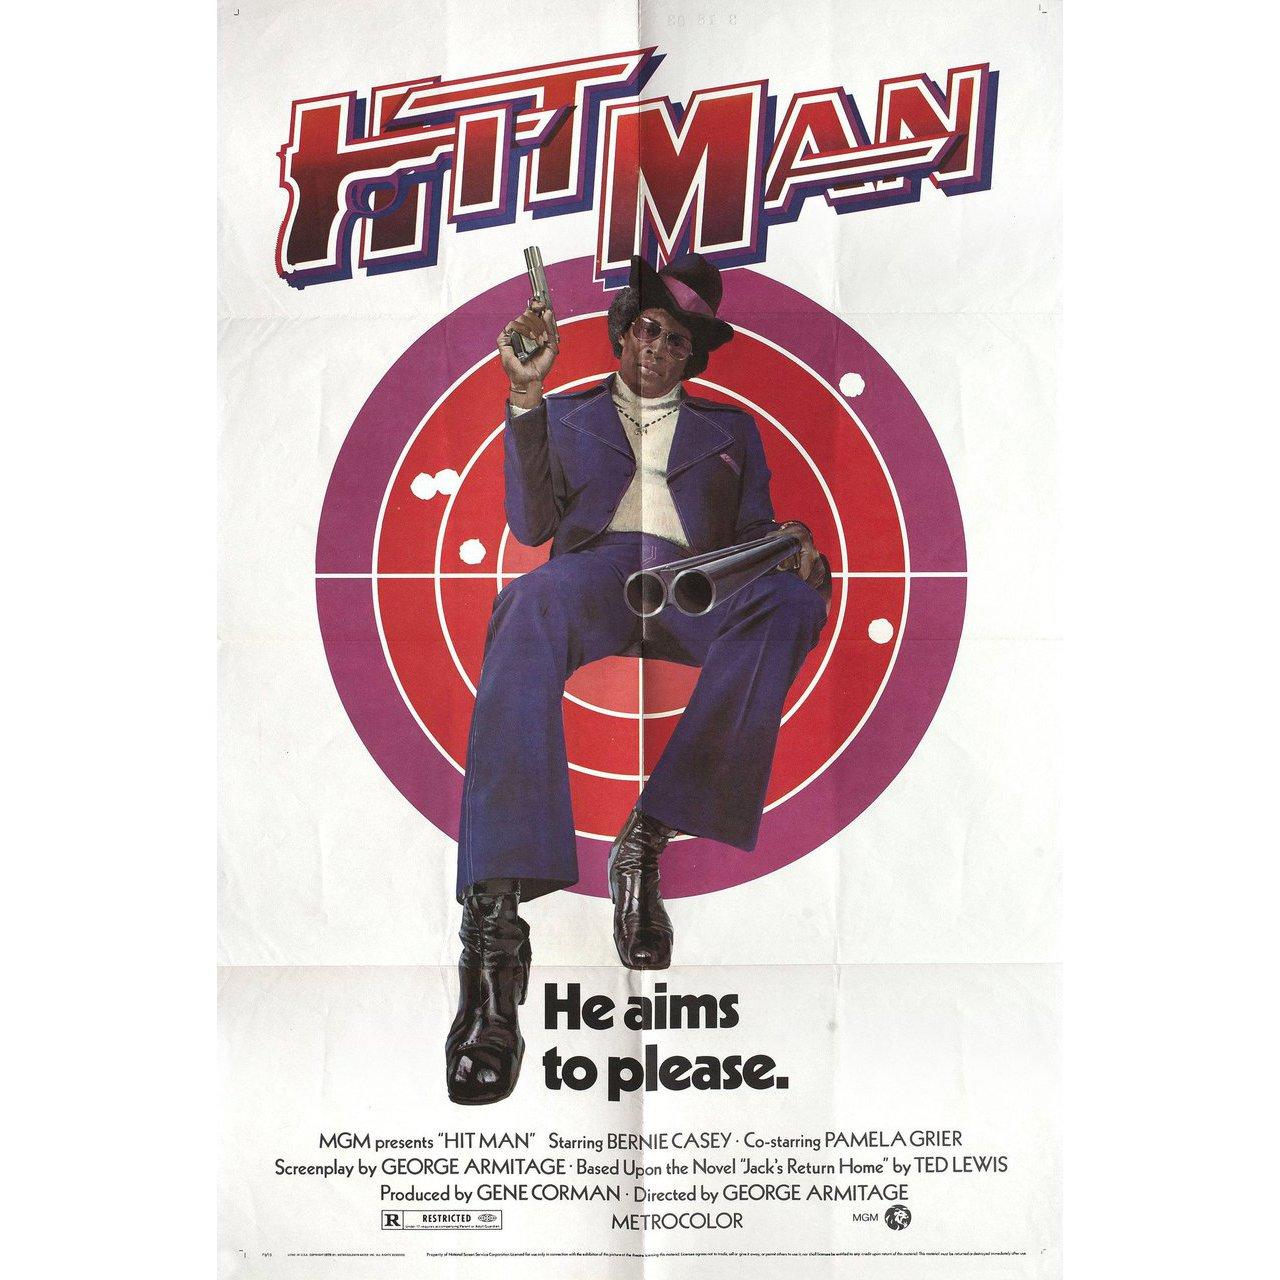 Original 1972 U.S. one sheet poster for the film 'Hit Man' directed by George Armitage with Bernie Casey / Pam Grier / Lisa Moore / Bhetty Waldron. Fine condition, folded. Many original posters were issued folded or were subsequently folded. Please